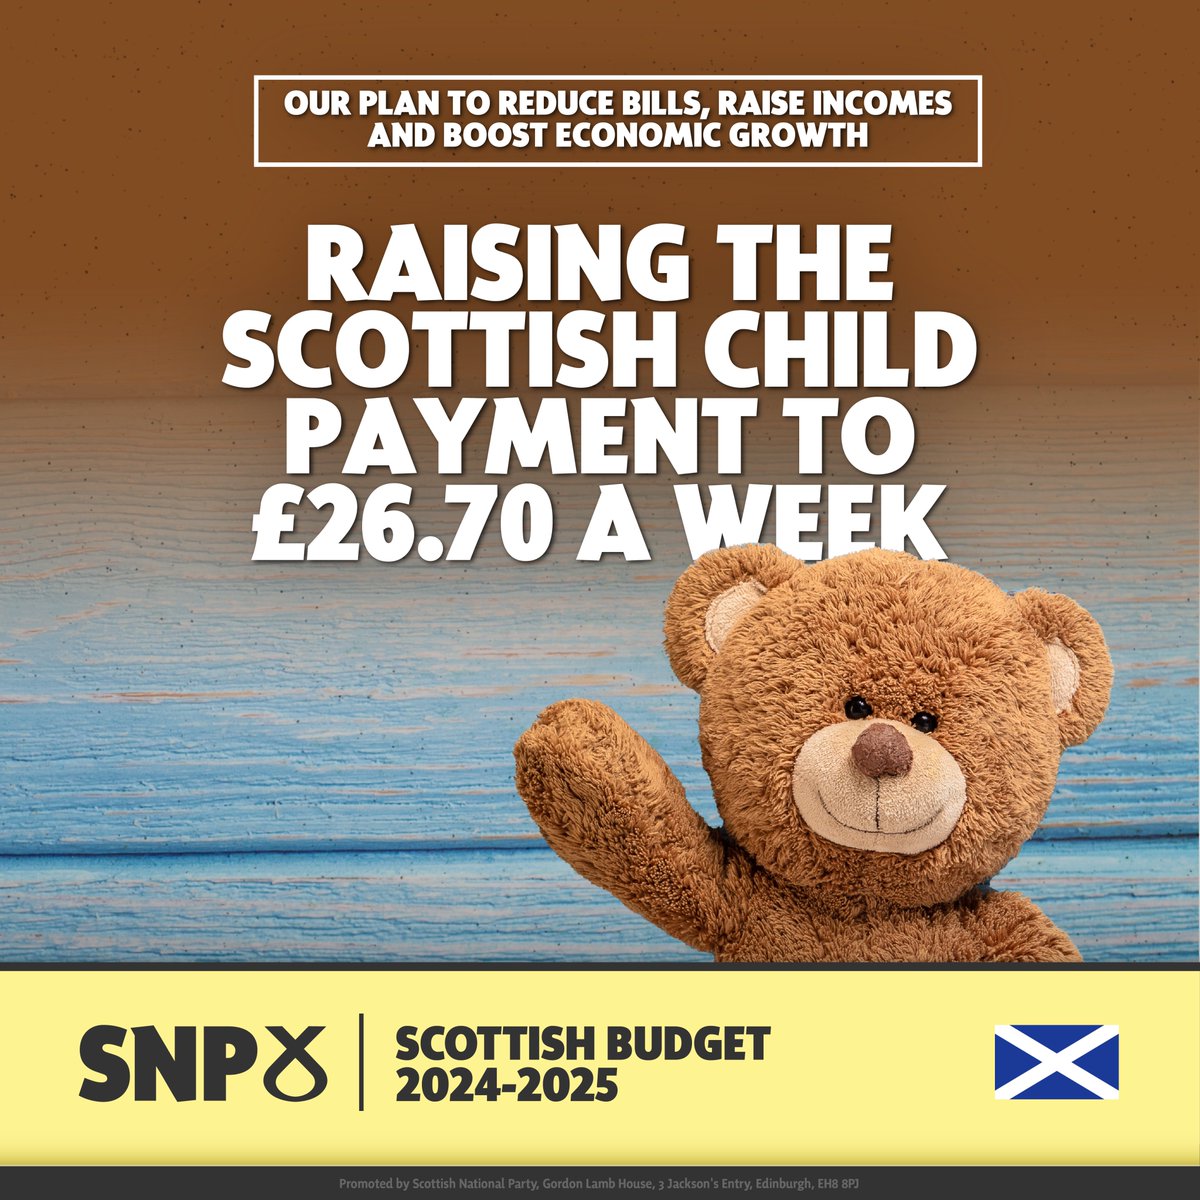 💛 We will increase our Scottish Child Payment to £26.70 - labelled 'game-changing' by anti-poverty charities.

🏴󠁧󠁢󠁳󠁣󠁴󠁿 The Scottish Child Payment is unique to Scotland, the most ambitious child poverty reduction measure in the UK. #ScotBudget